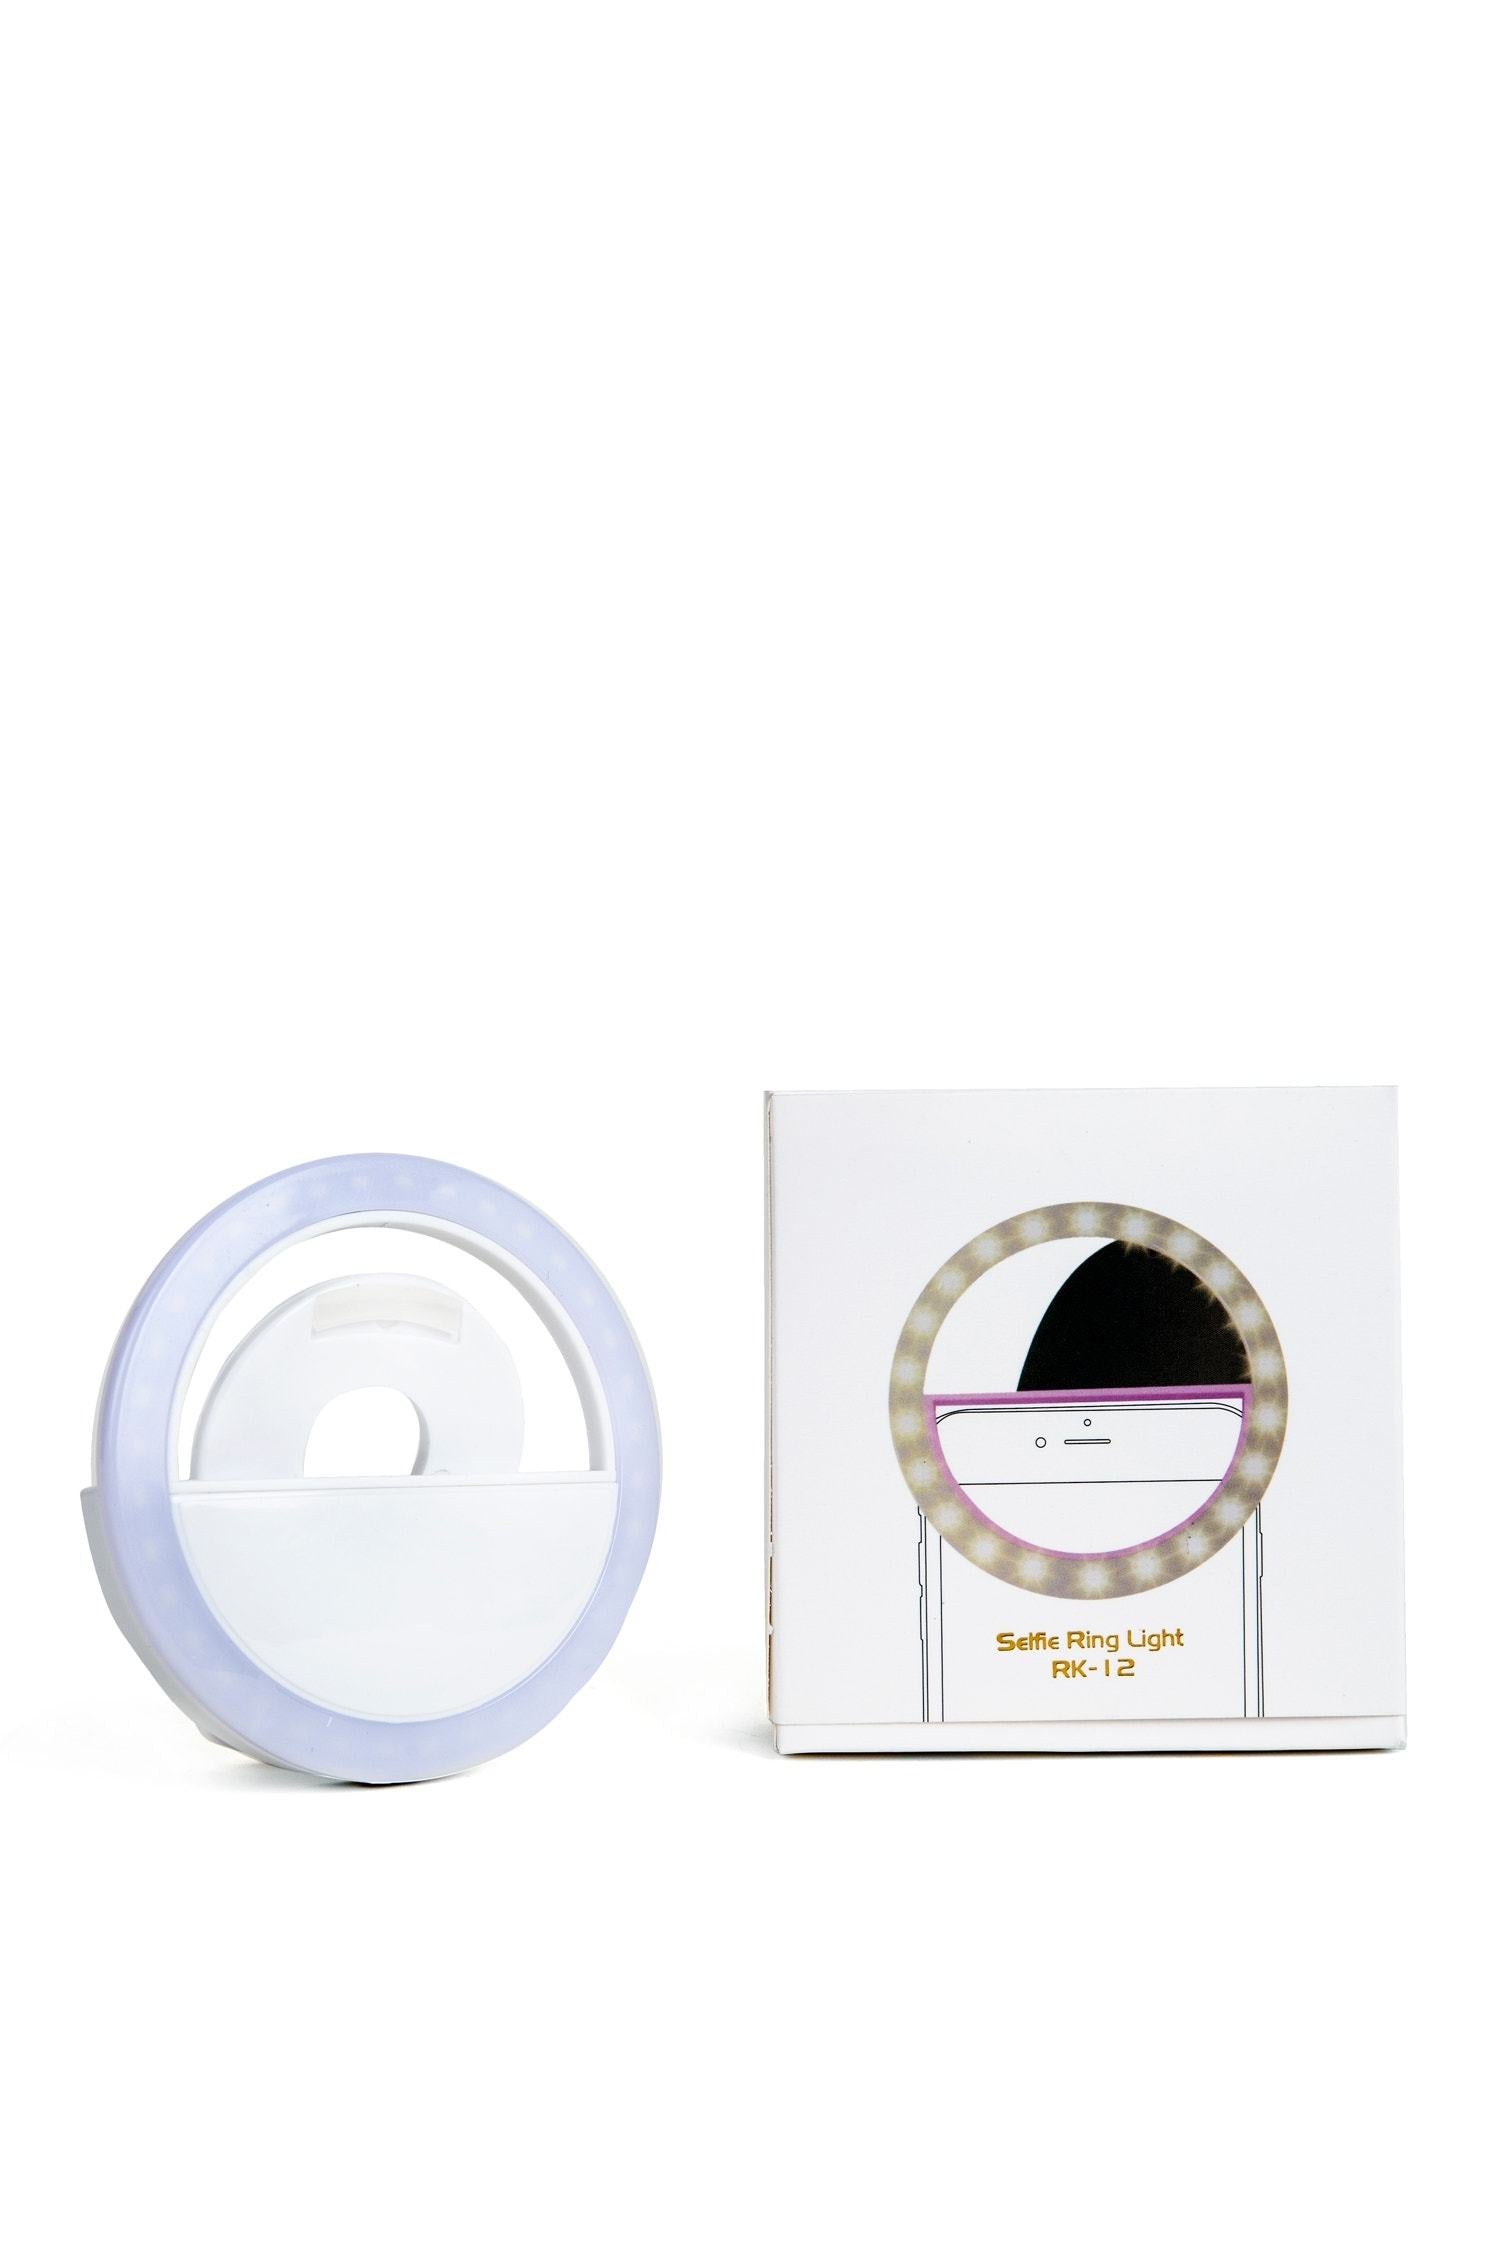 Selfie Ring LED Light - Lady Occasions